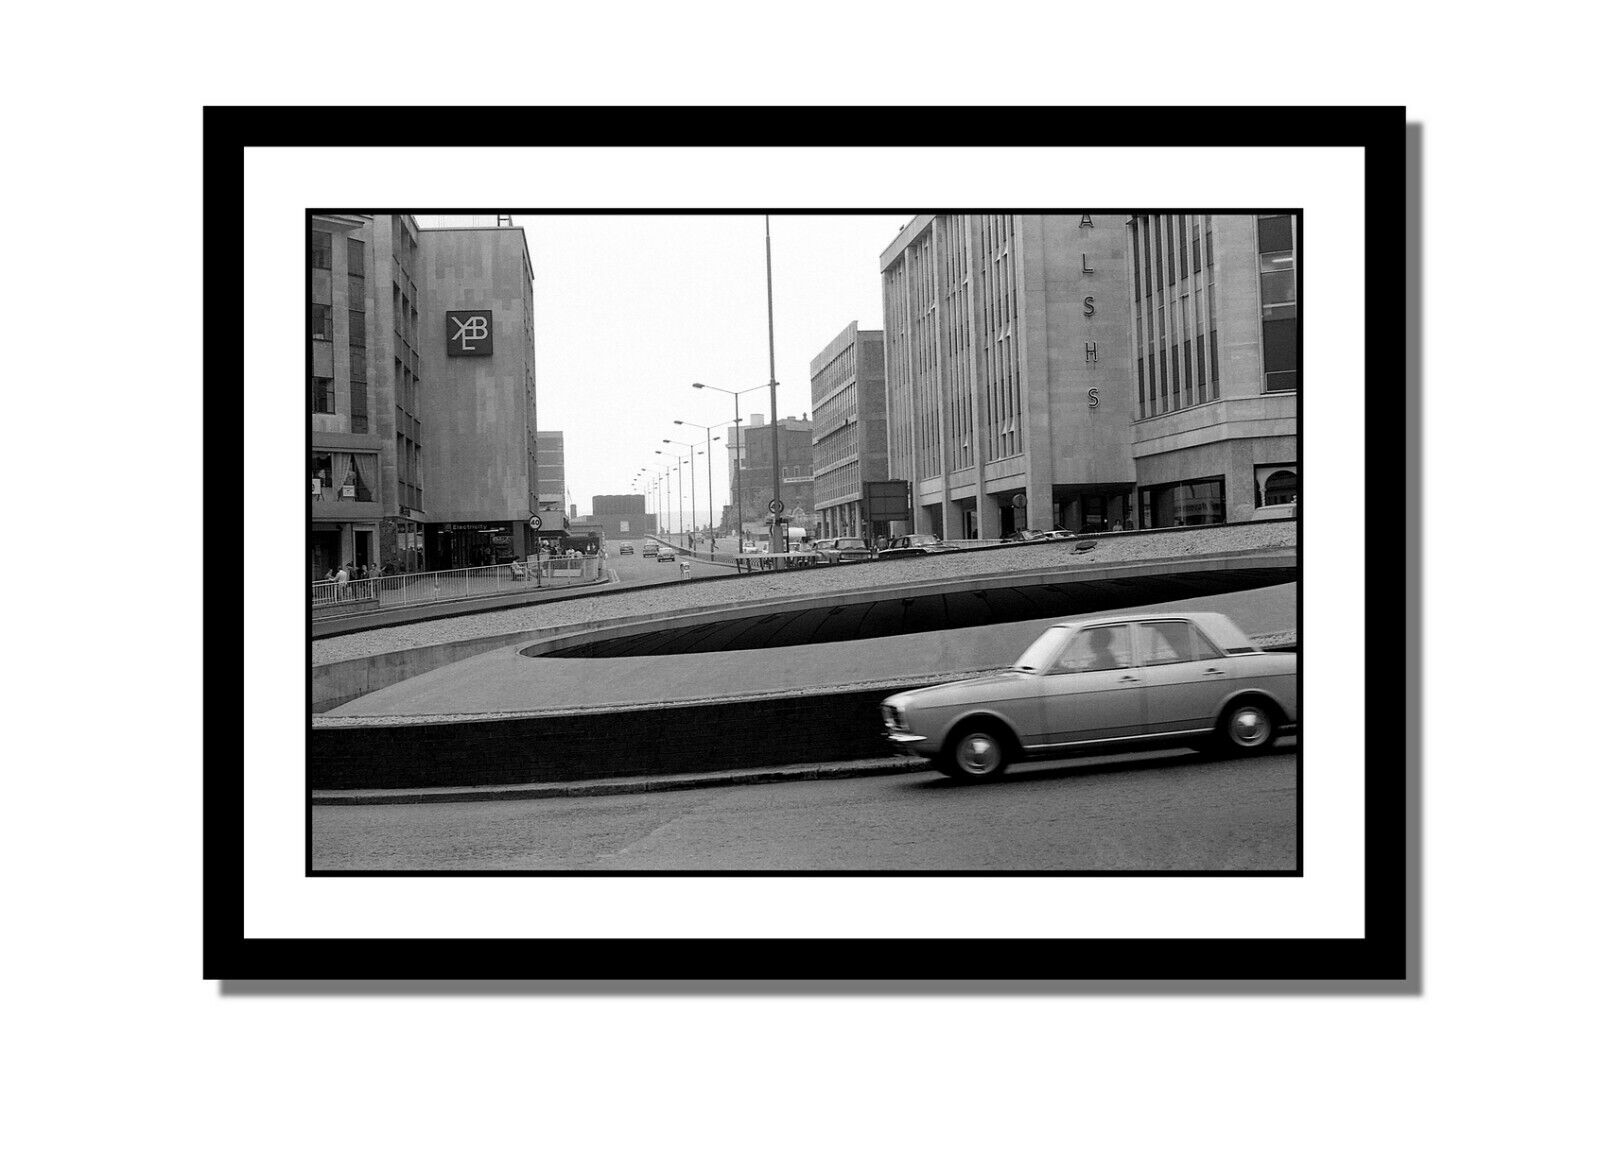 Framed Image of Sheffield - 18x12 inch Framed Iconic Photo Poster painting - Hole In The Road #1